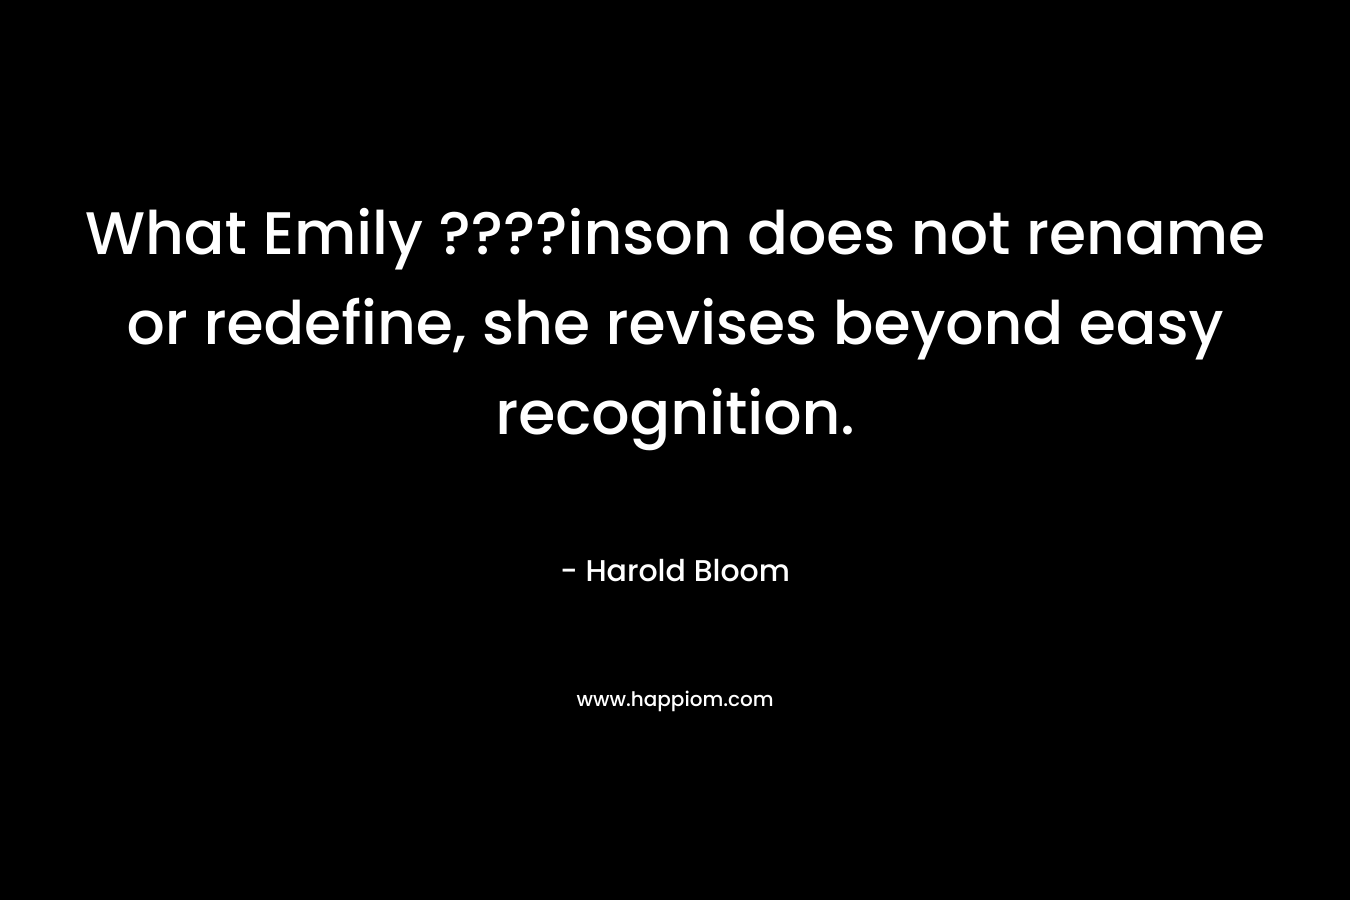 What Emily ????inson does not rename or redefine, she revises beyond easy recognition.